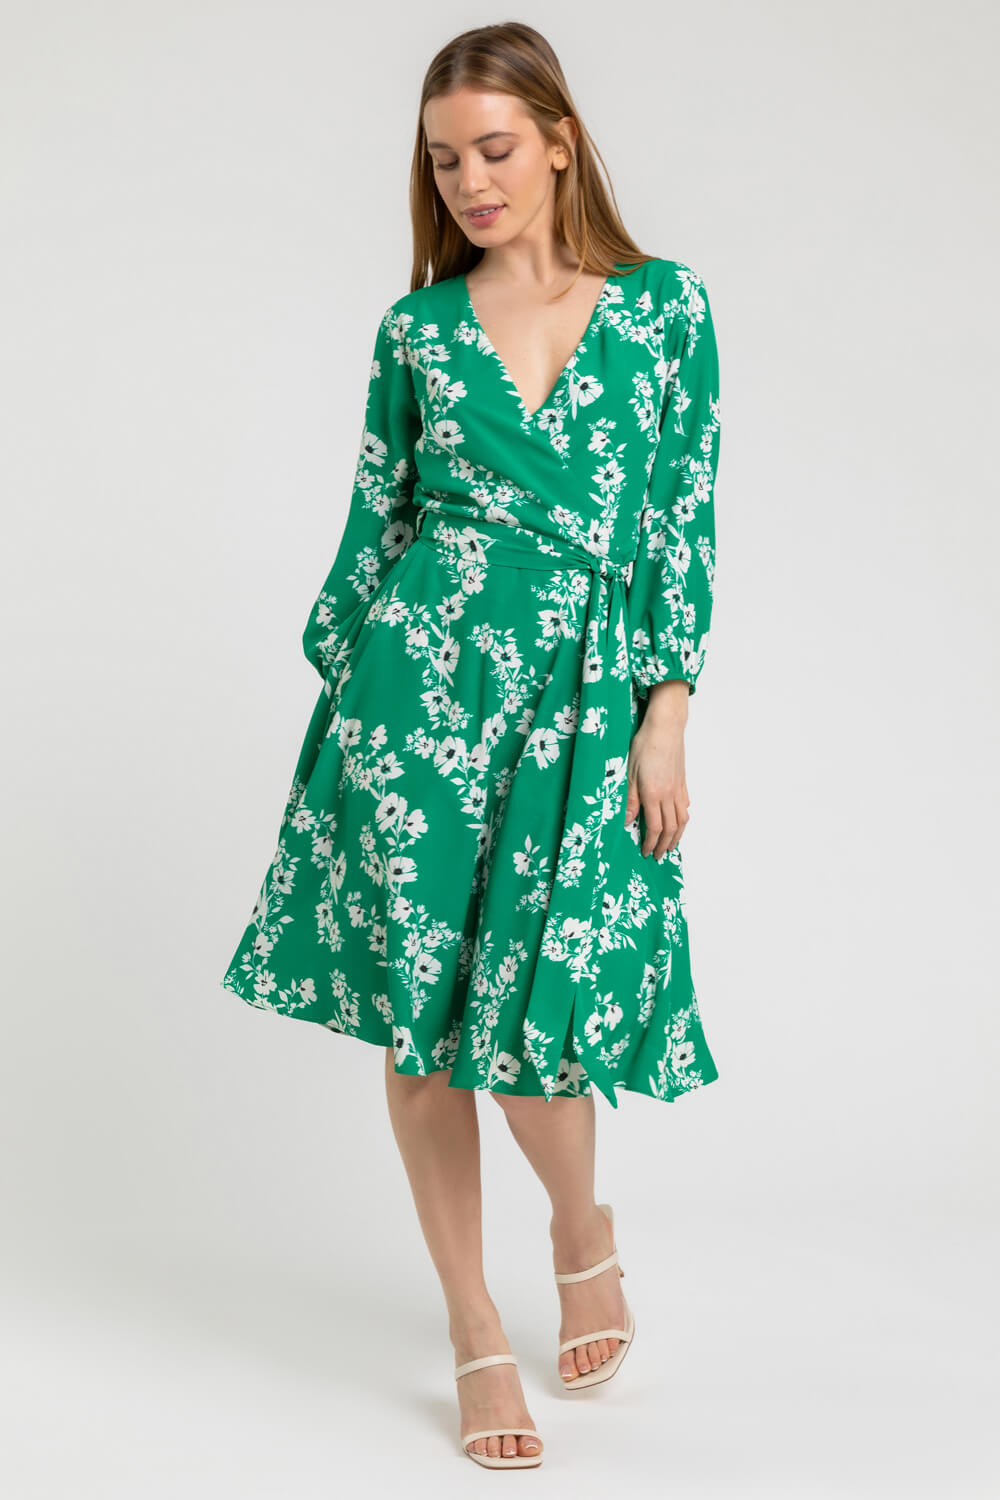 Petite Floral Fit & Flare Dress in Green | Roman UK